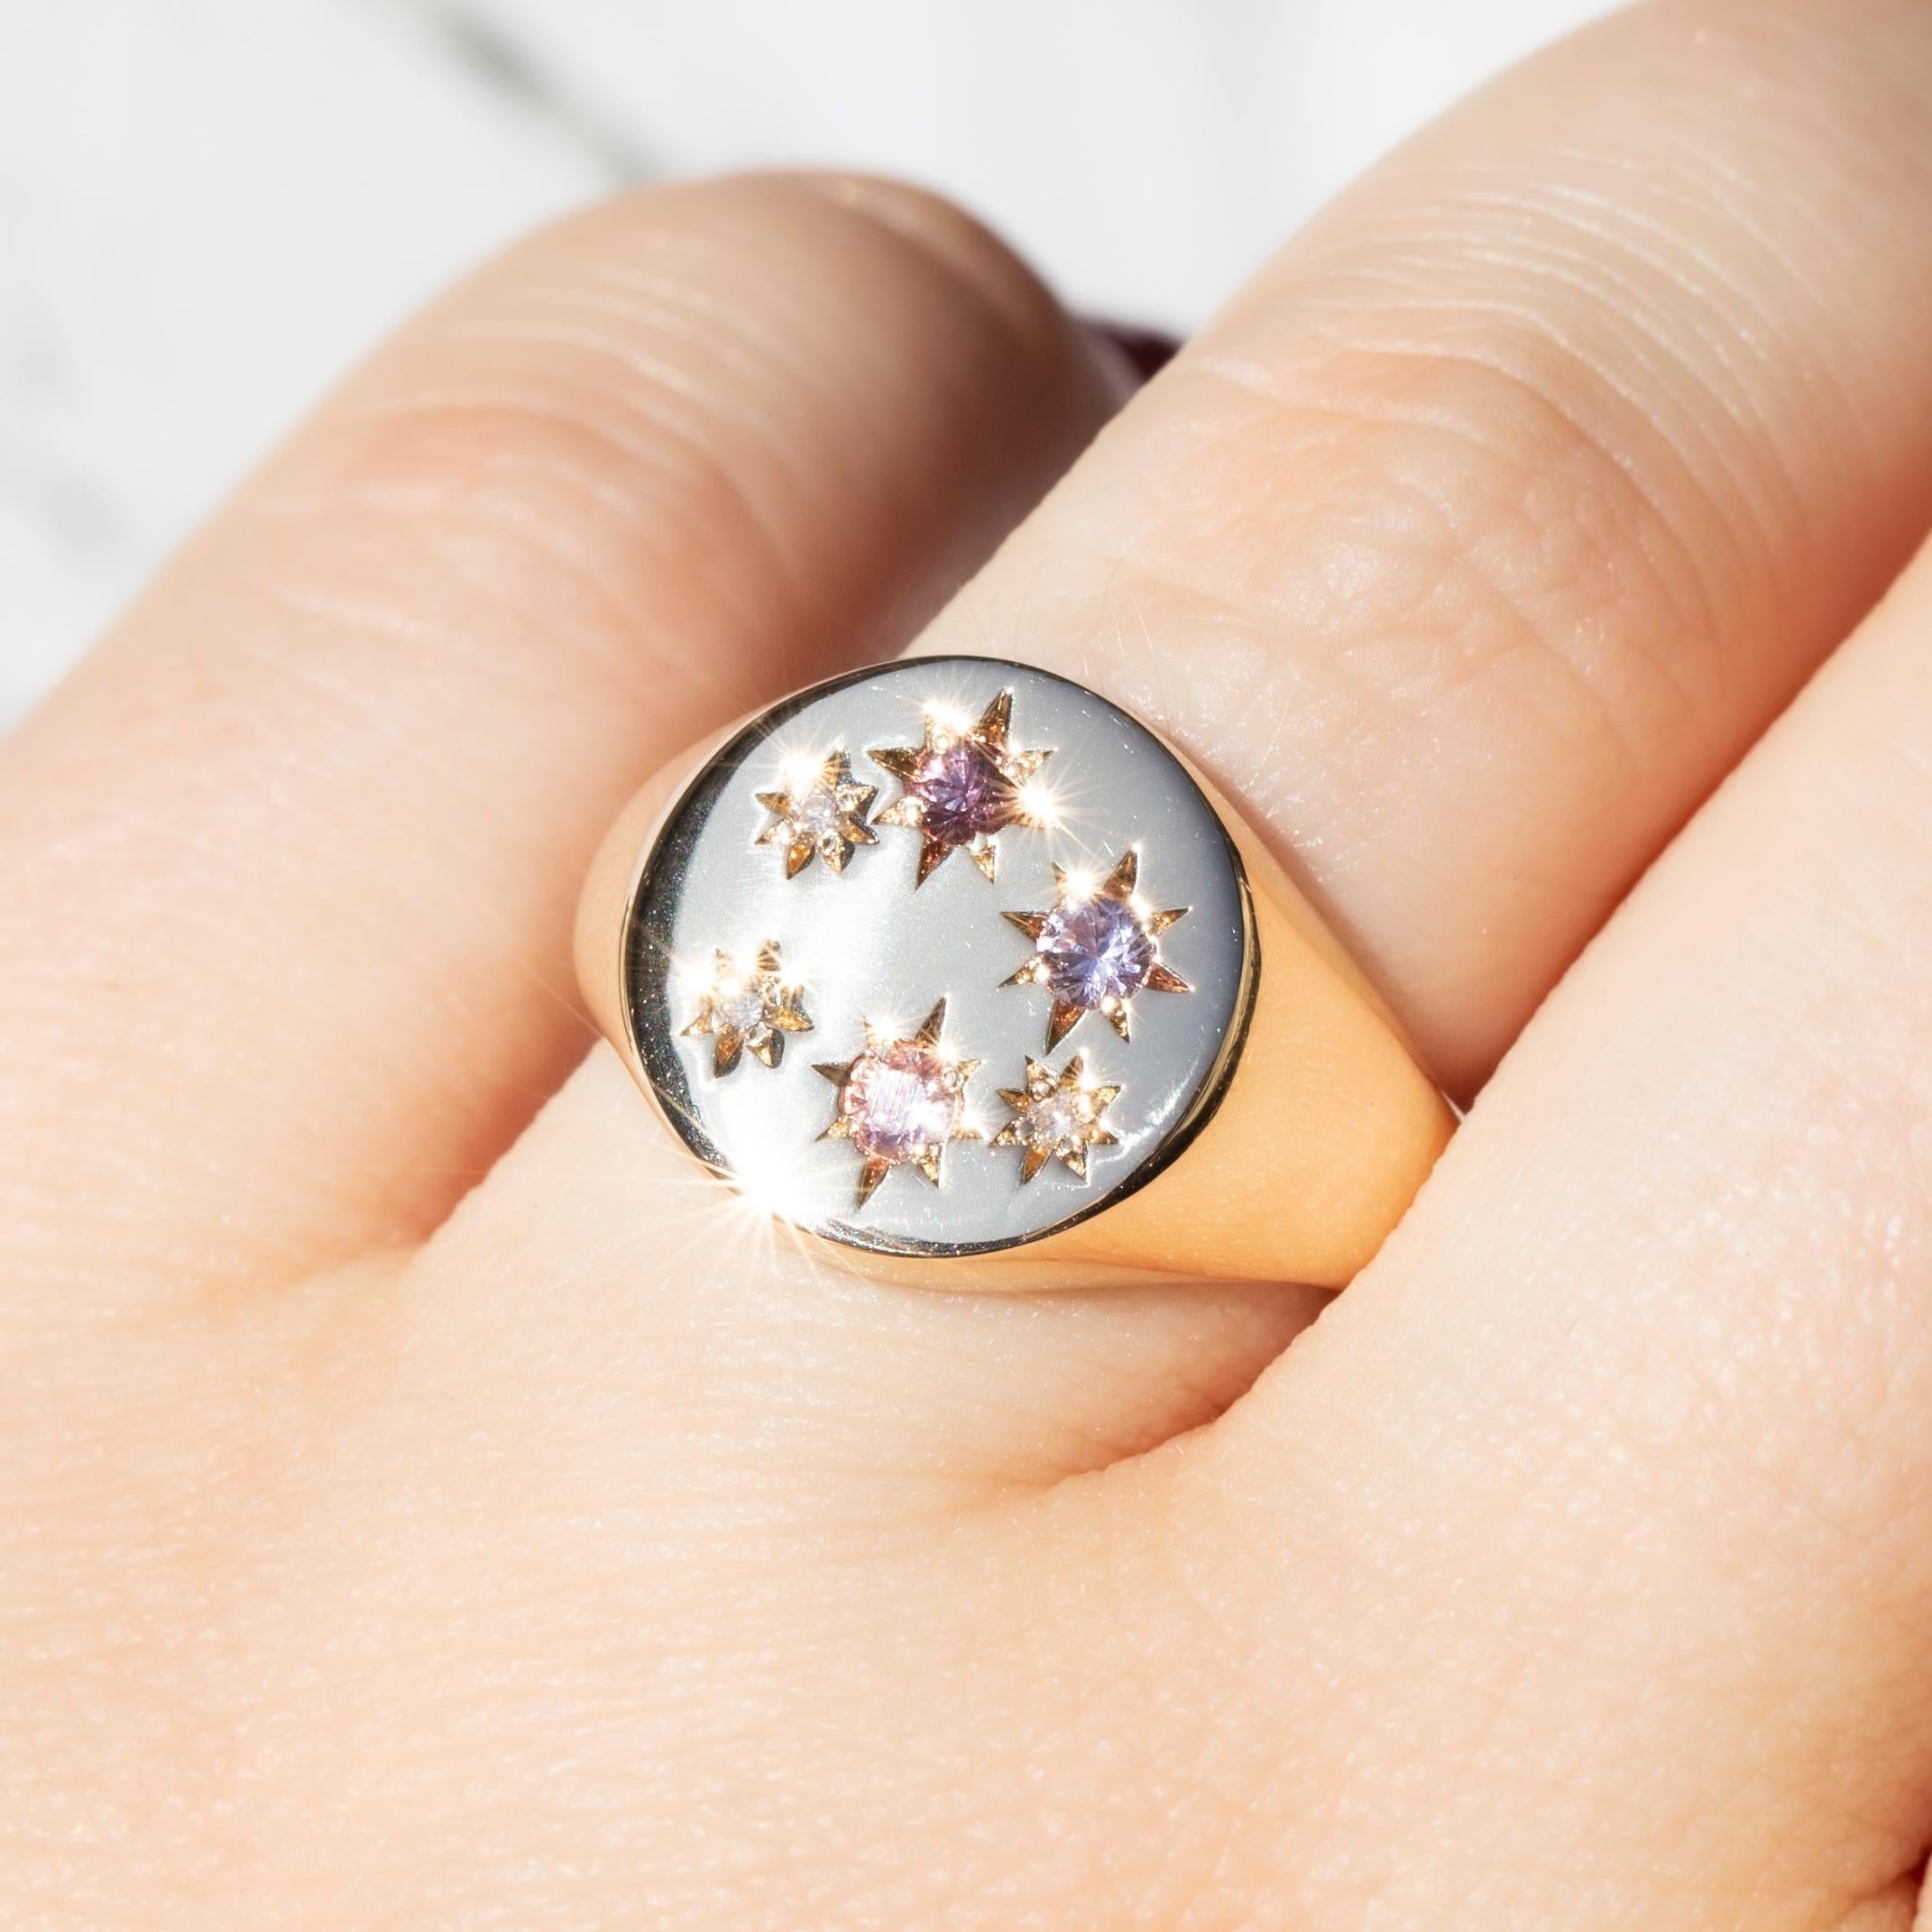 Forged in 9 carat white gold, this adorable reinvented vintage ring sees a gleaming band widen to a circular top set with faceted round sapphires in shades of pinks and purples and two shimmering round brilliant cut diamonds. Her name is Emmeline,